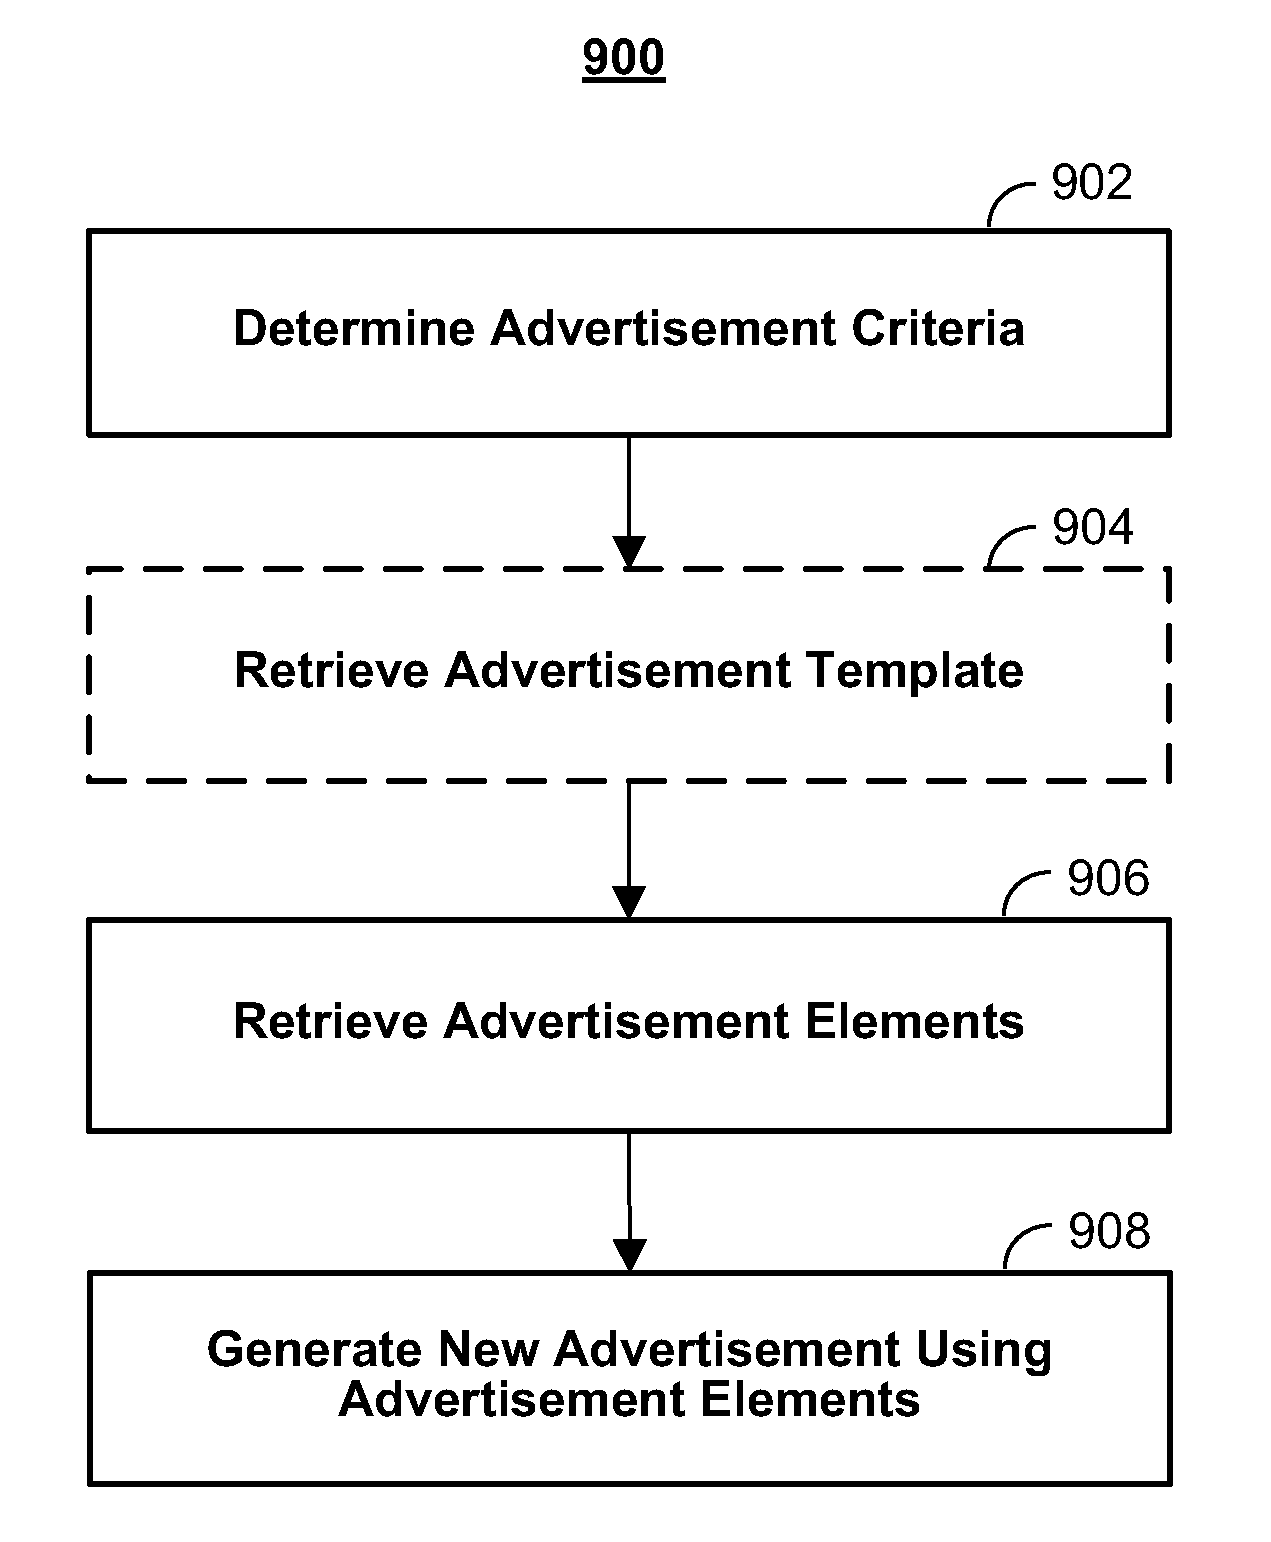 Systems and methods for automatically generating advertisements using a media guidance application